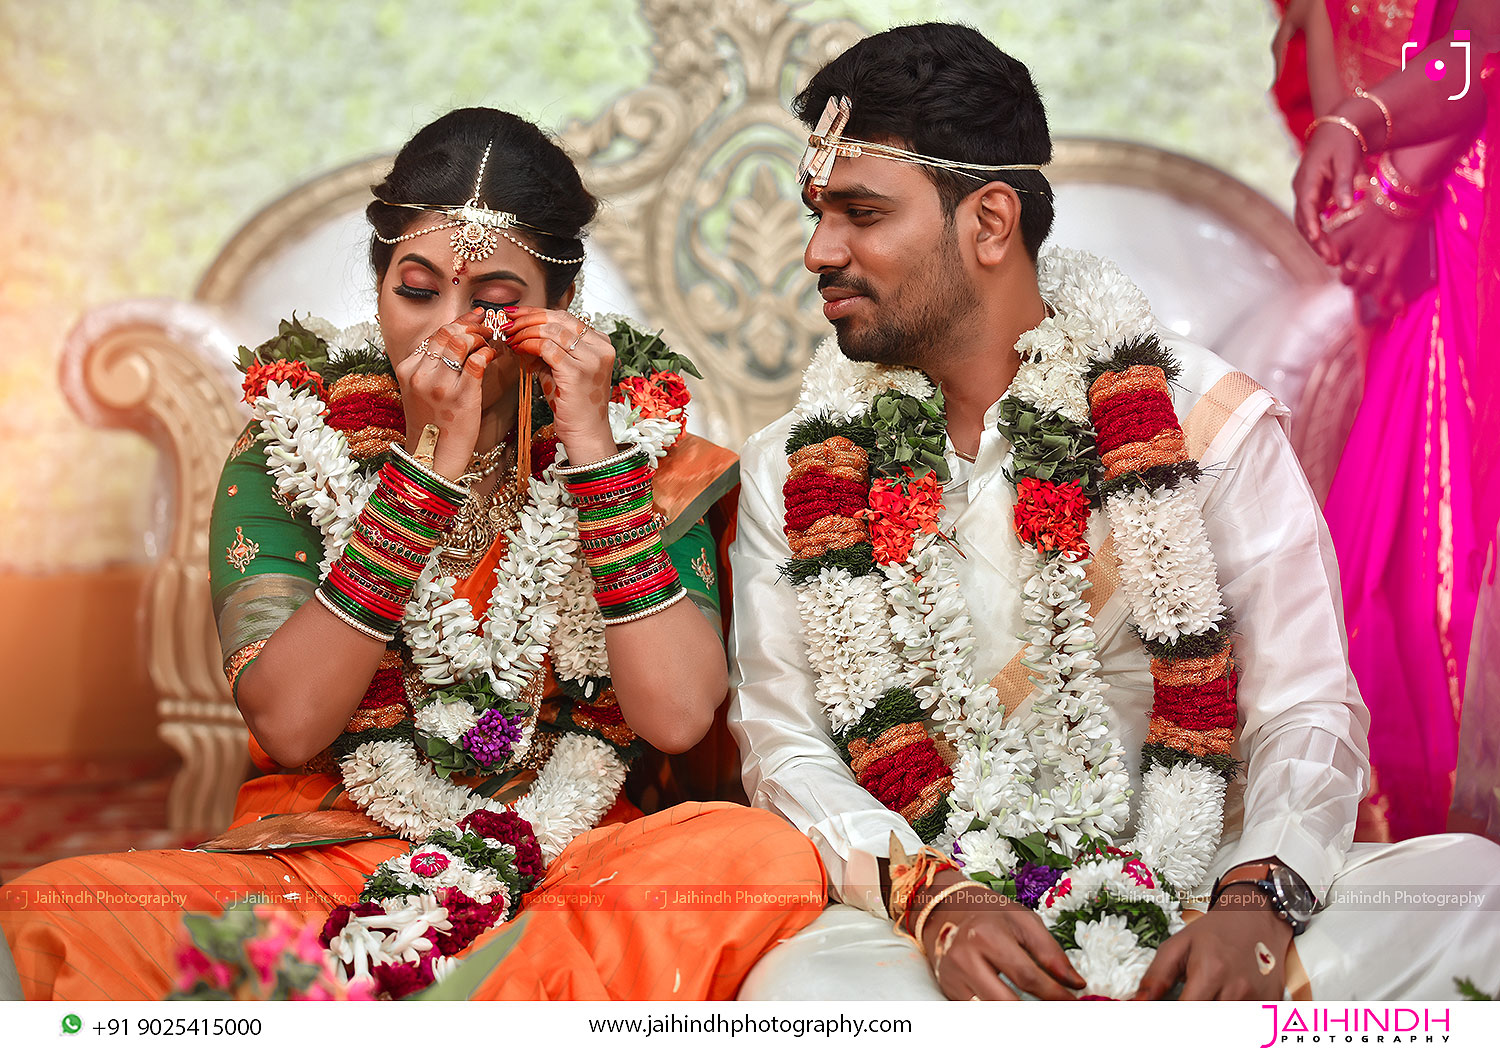 Best Candid Photographers In Namakkal,
Candid Wedding Photographers In Namakkal,
Candid Photography In Namakkal,
Candid Wedding Photography In Namakkal
